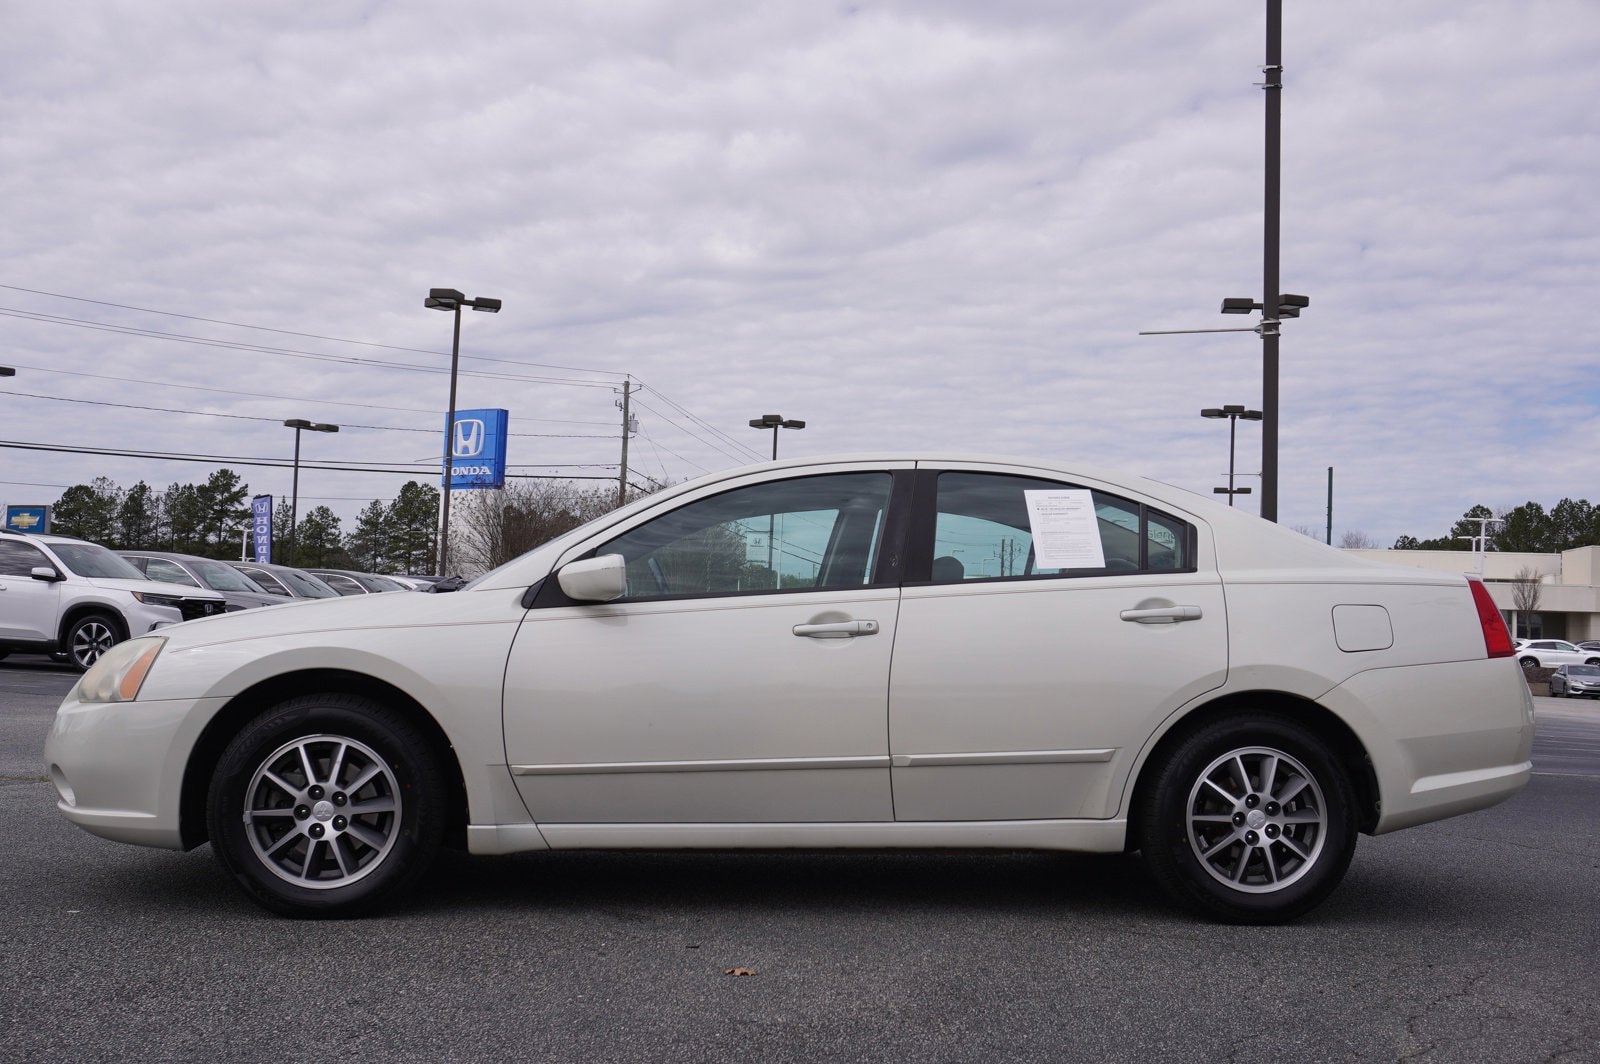 Used 2005 Mitsubishi Galant LS V6 with VIN 4A3AB46S15E038598 for sale in Union City, GA